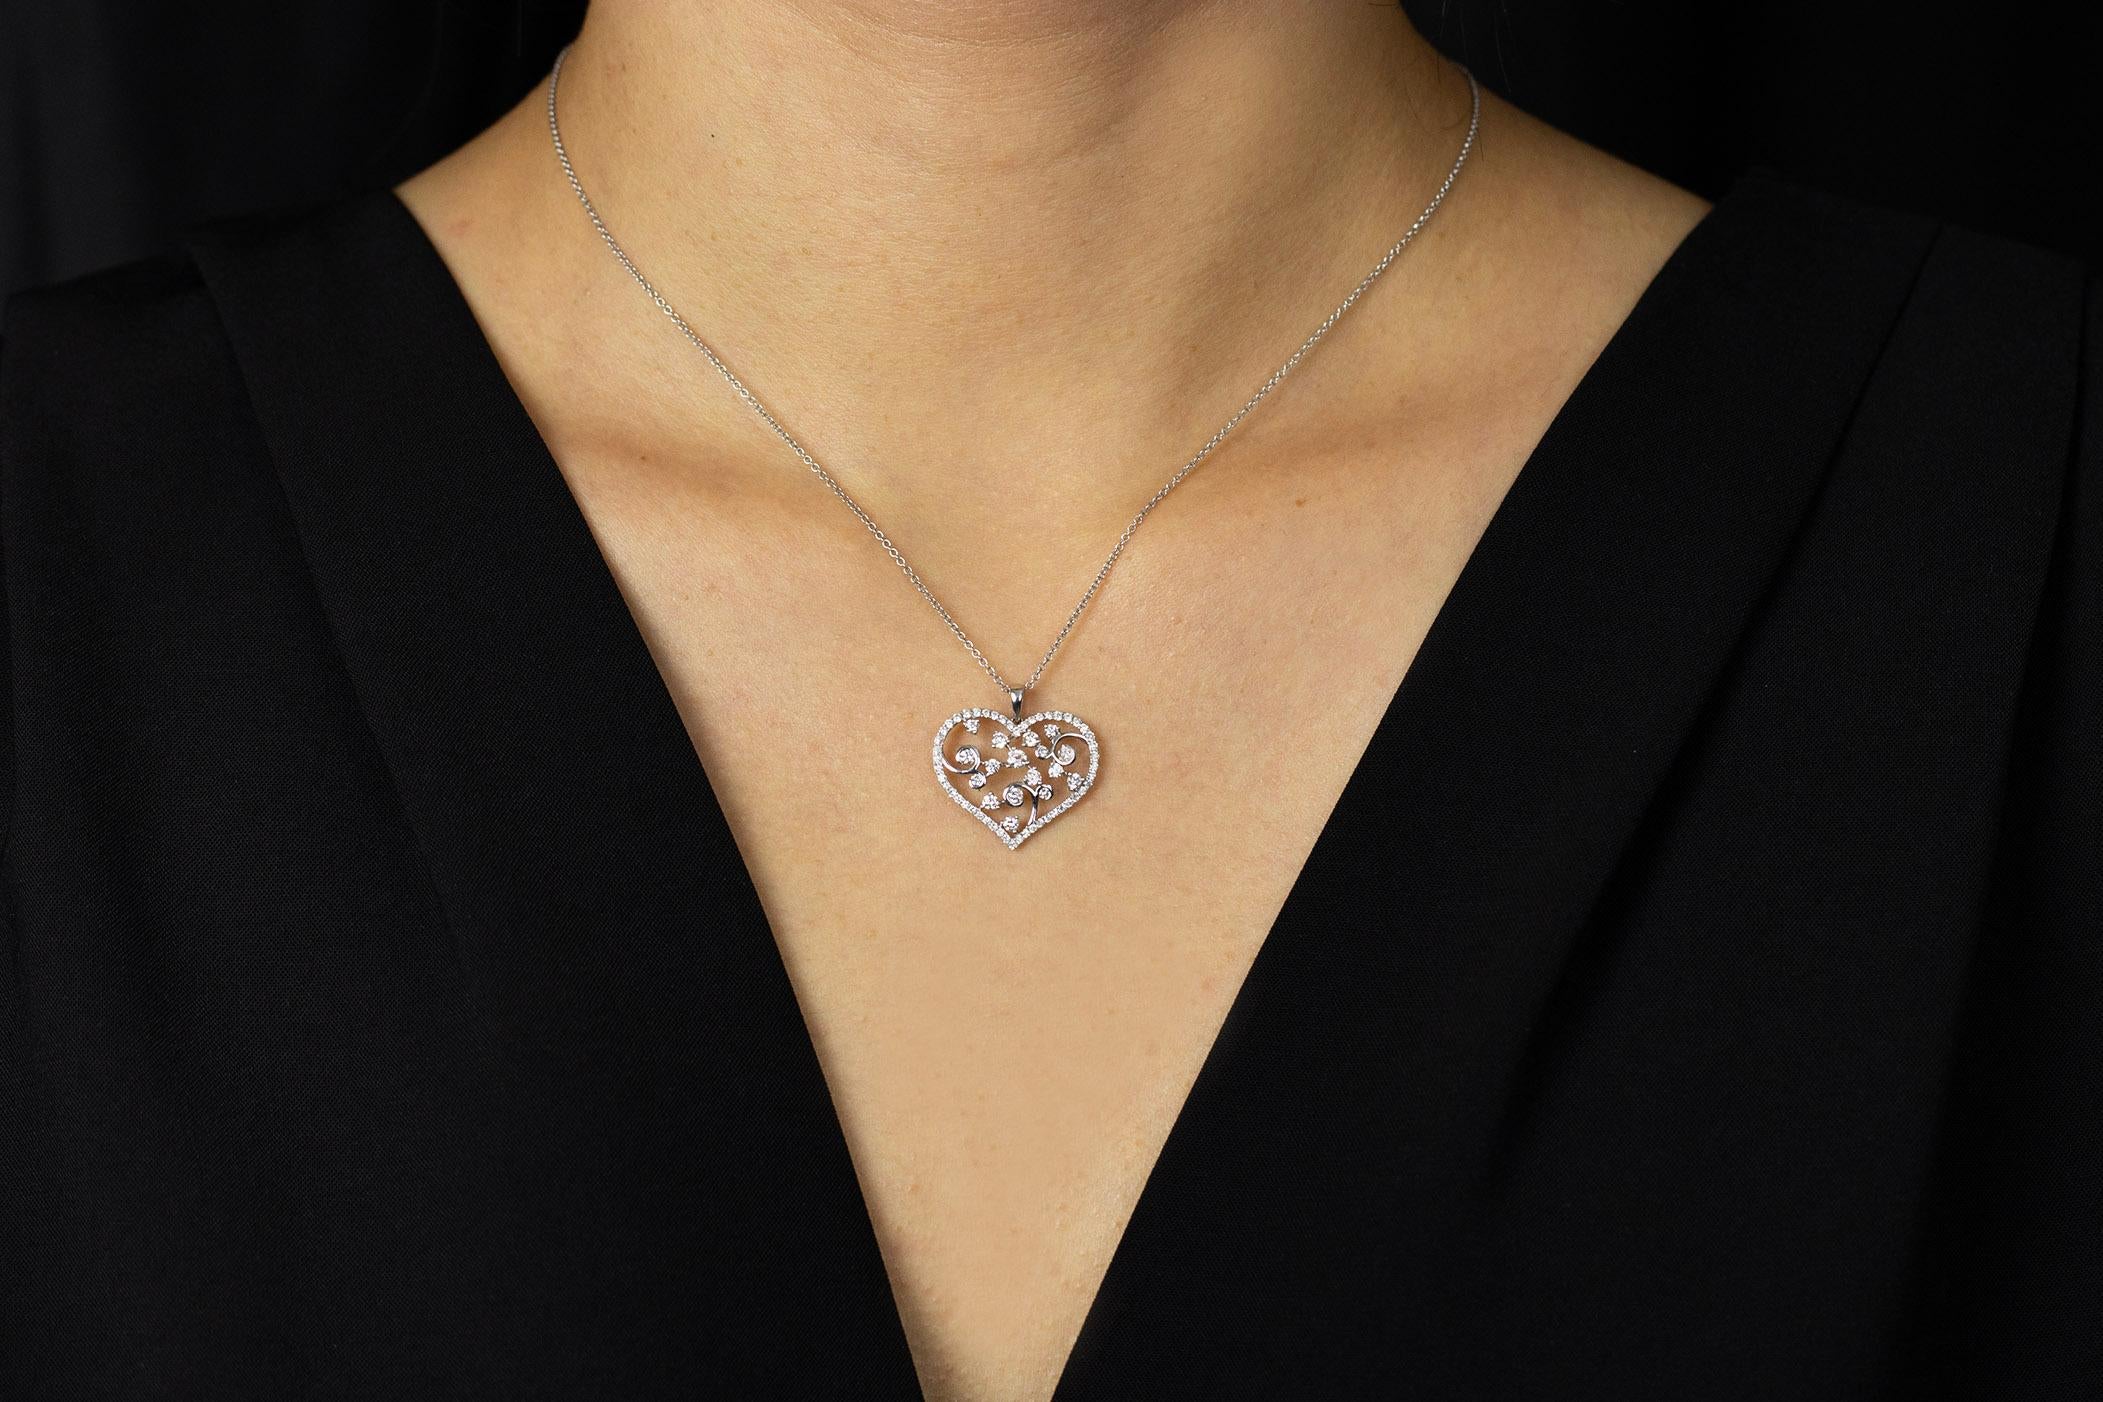 Showcasing this gorgeous 18K white gold heart pendant with an elegant open-work design; set with round brilliant diamonds weighing 0.82 carats total. Finely made in 18K white gold and suspended on an 16 inches adjustable chain.

Roman Malakov is a